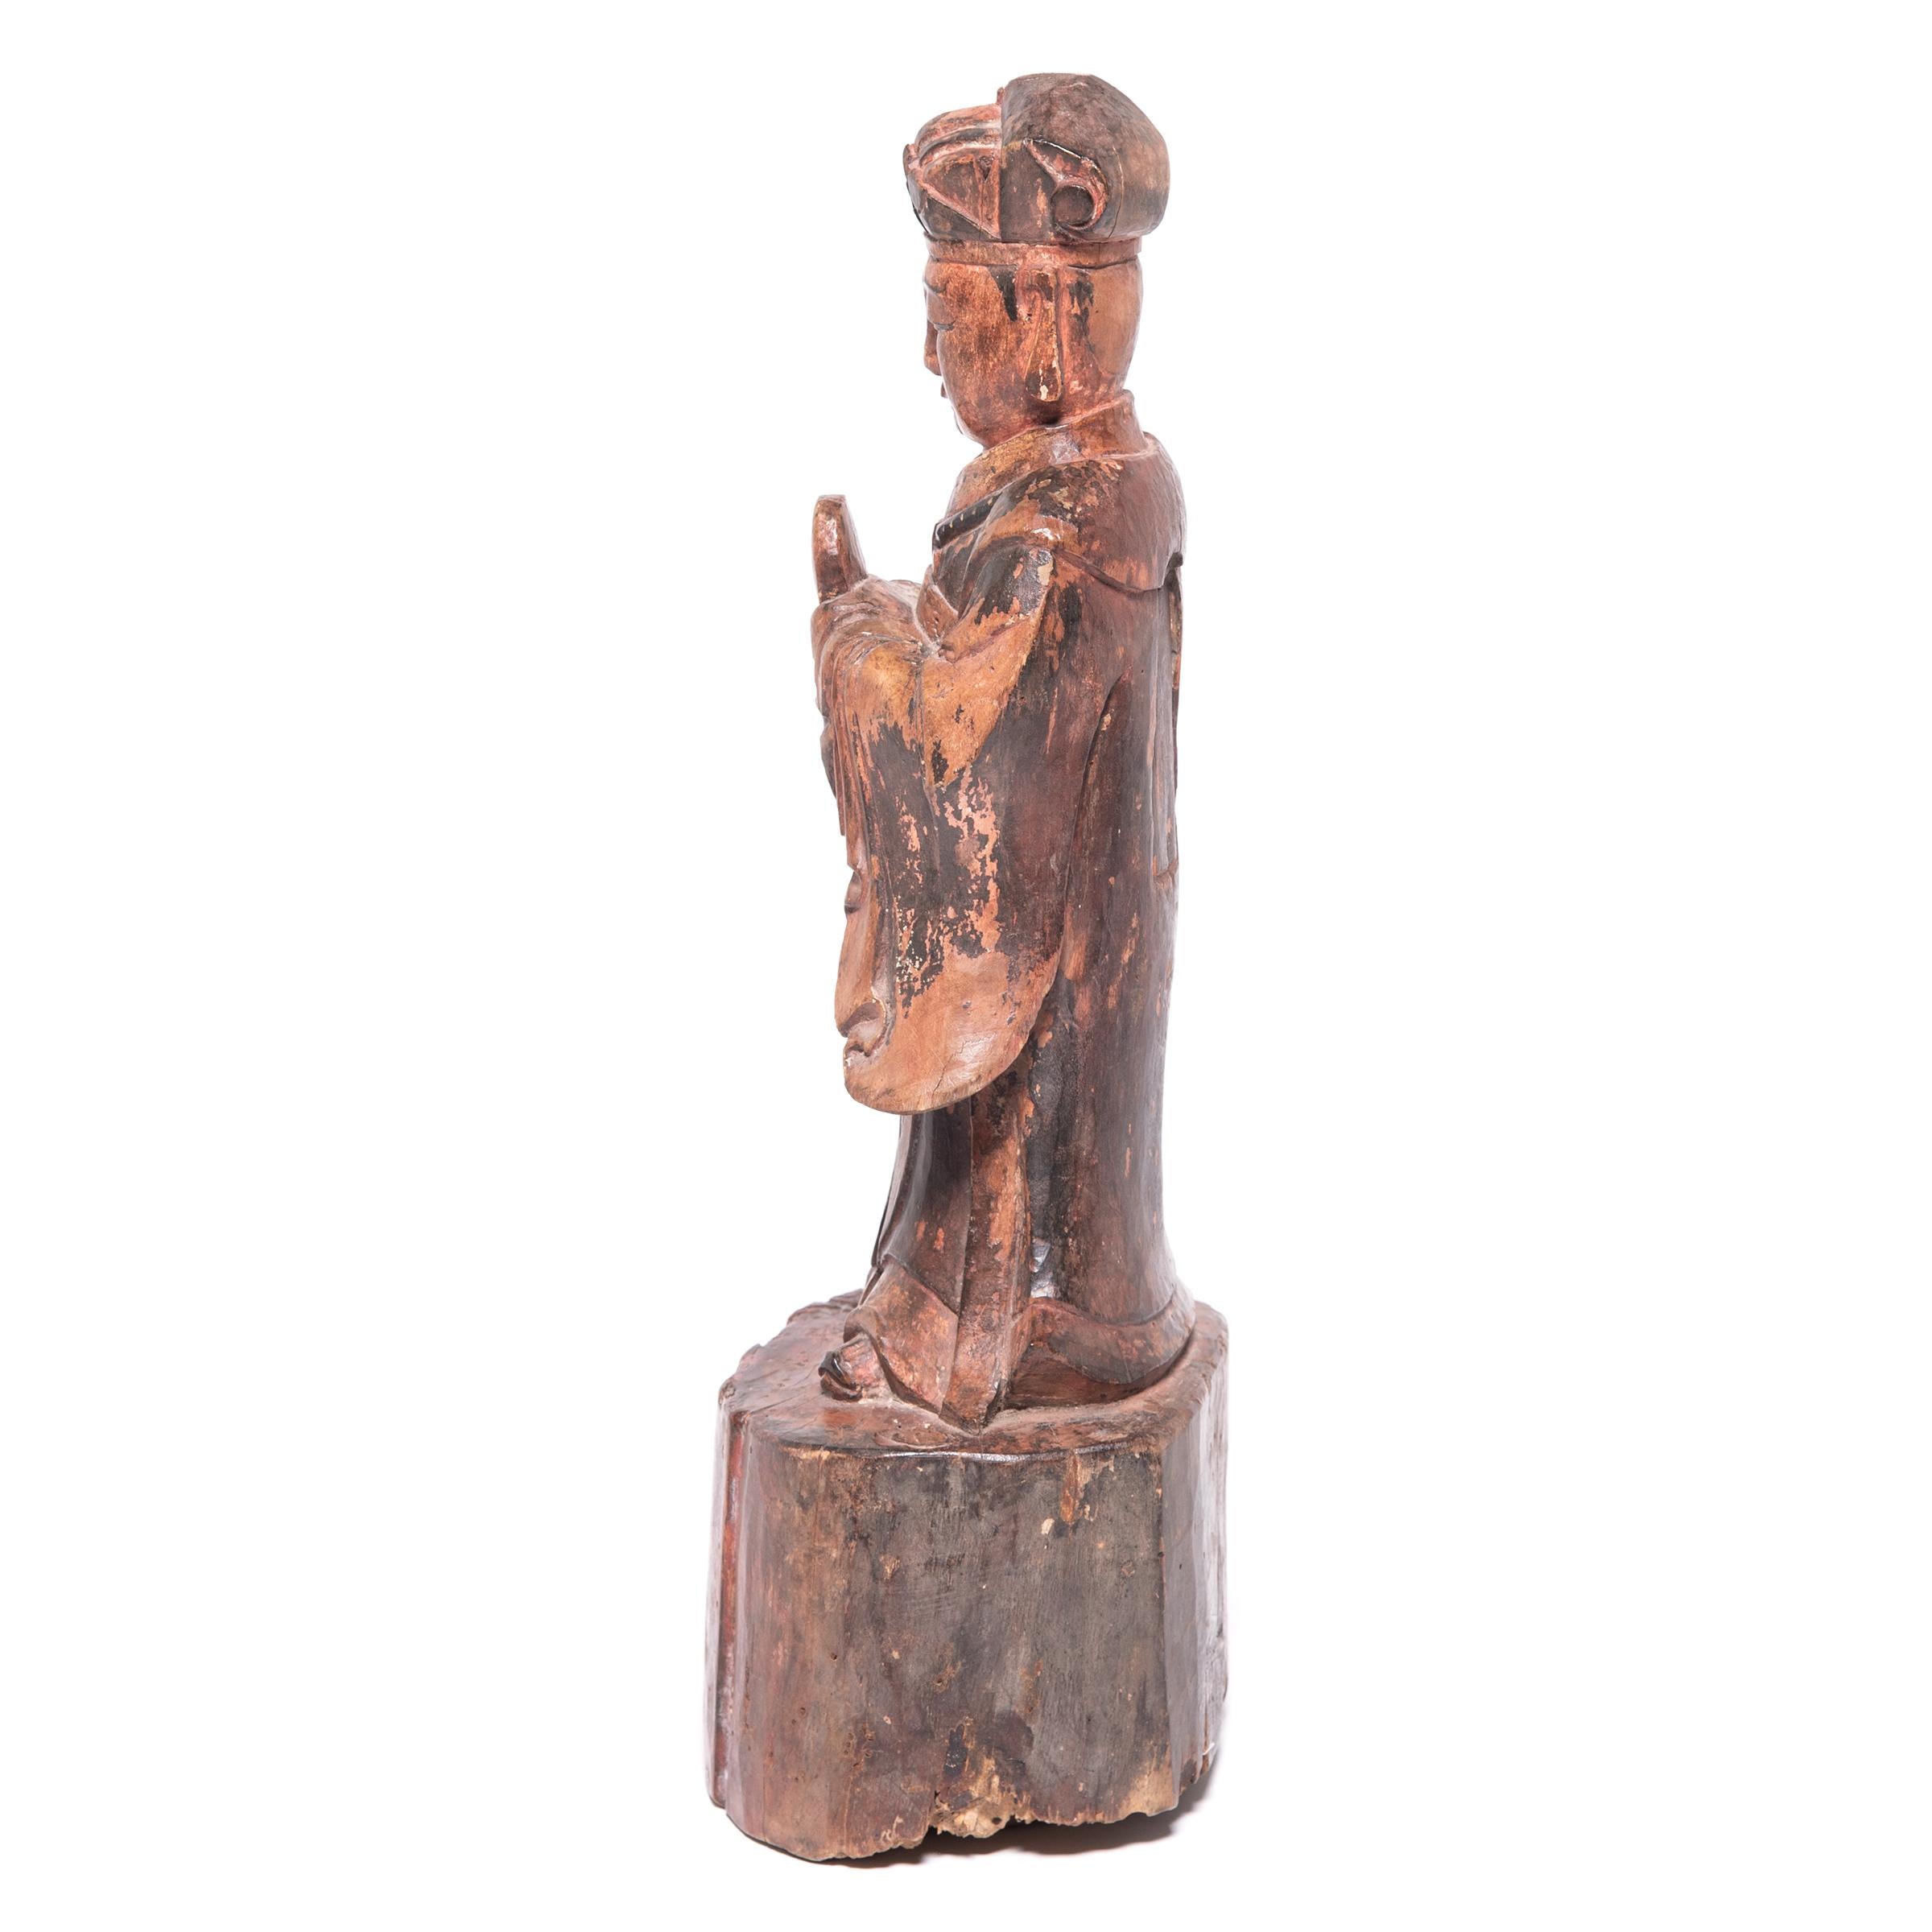 Carved in wood, this 19th-century figure of a spirit paid tribute to ancestors past on a traditional altar table. Allowing the base to reflect the wood’s natural state, the artist carved the figure with detailed robes and distinguishable features,